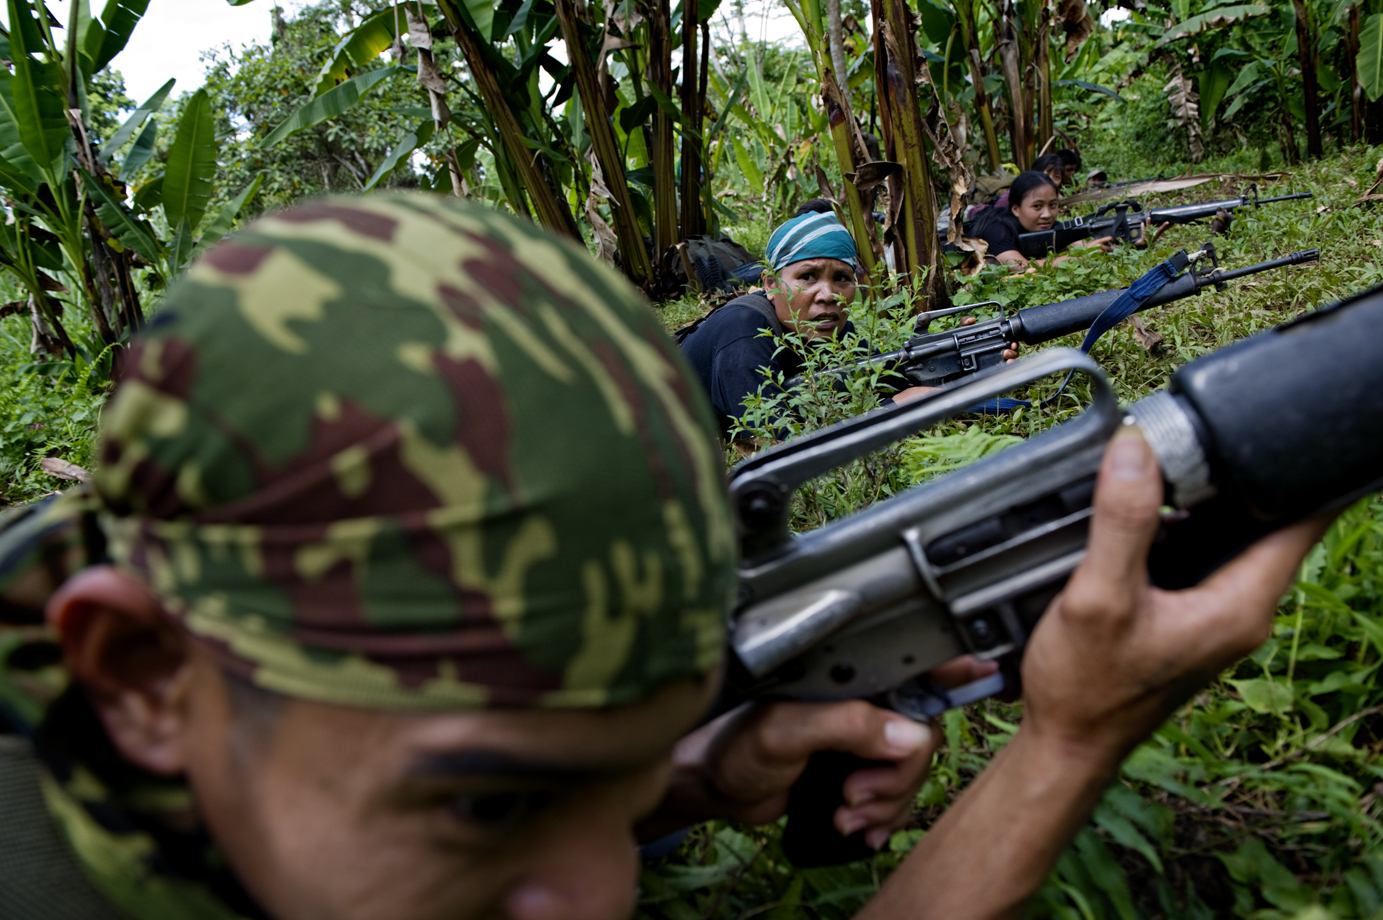  The communist rebels, NPA, training for battle in the jungles of Mindanao / Philippines - 2010 